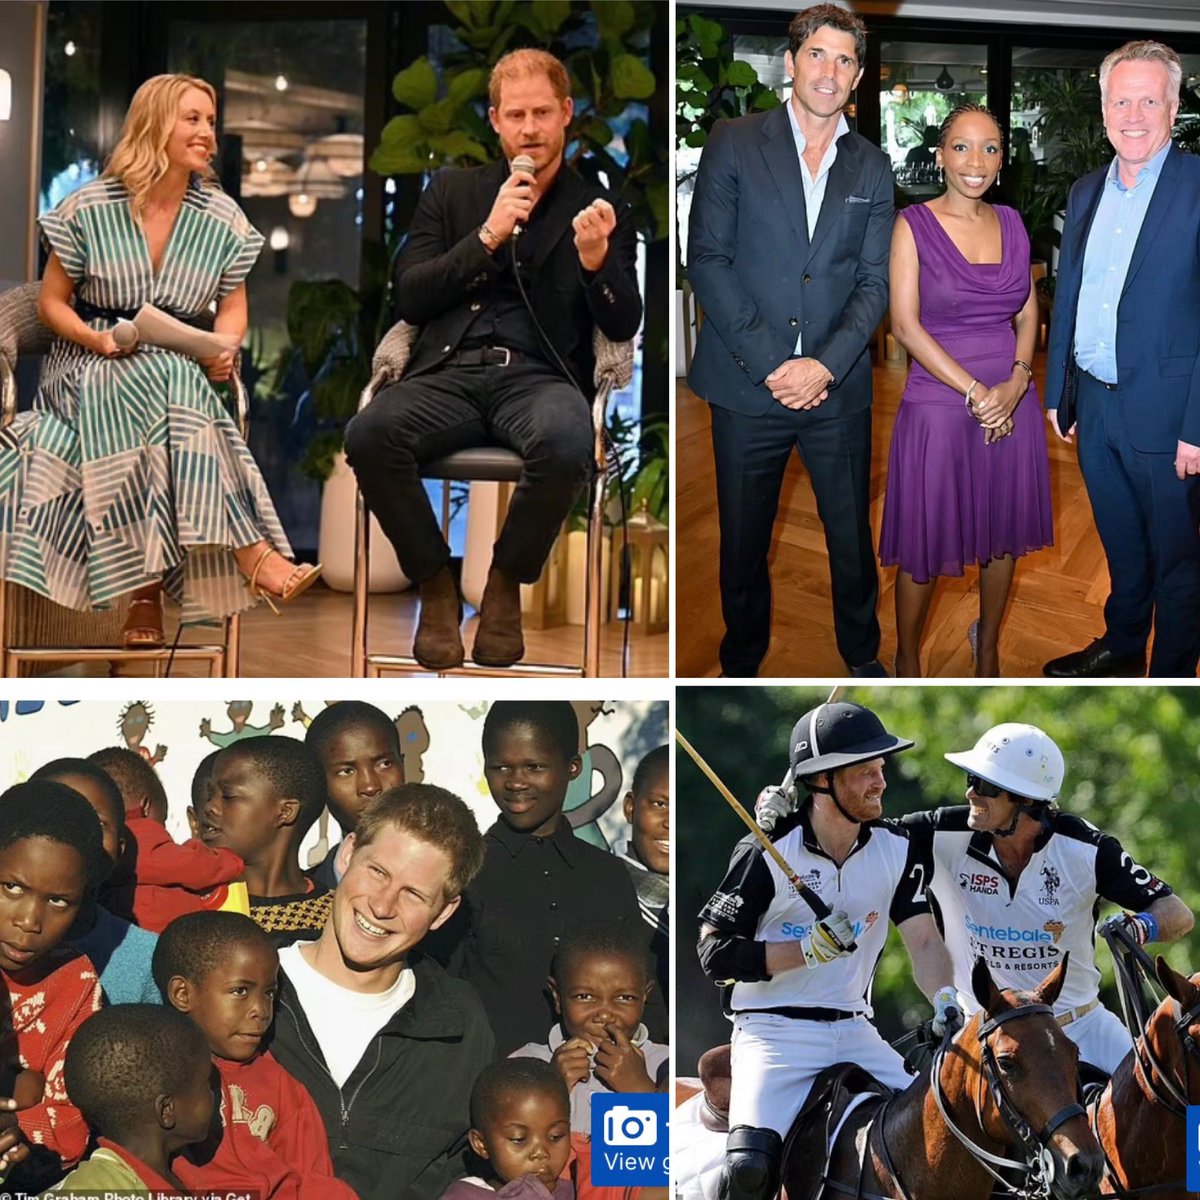 'Every single young person should have a chance at a better future.' - Prince Harry. Yesterday PH participated in a panel discussion in Miami where he honoured 'his late mother Princess Diana's HIV work'. Hosted by Sentebale, he is also due to take part in a charity polo match.